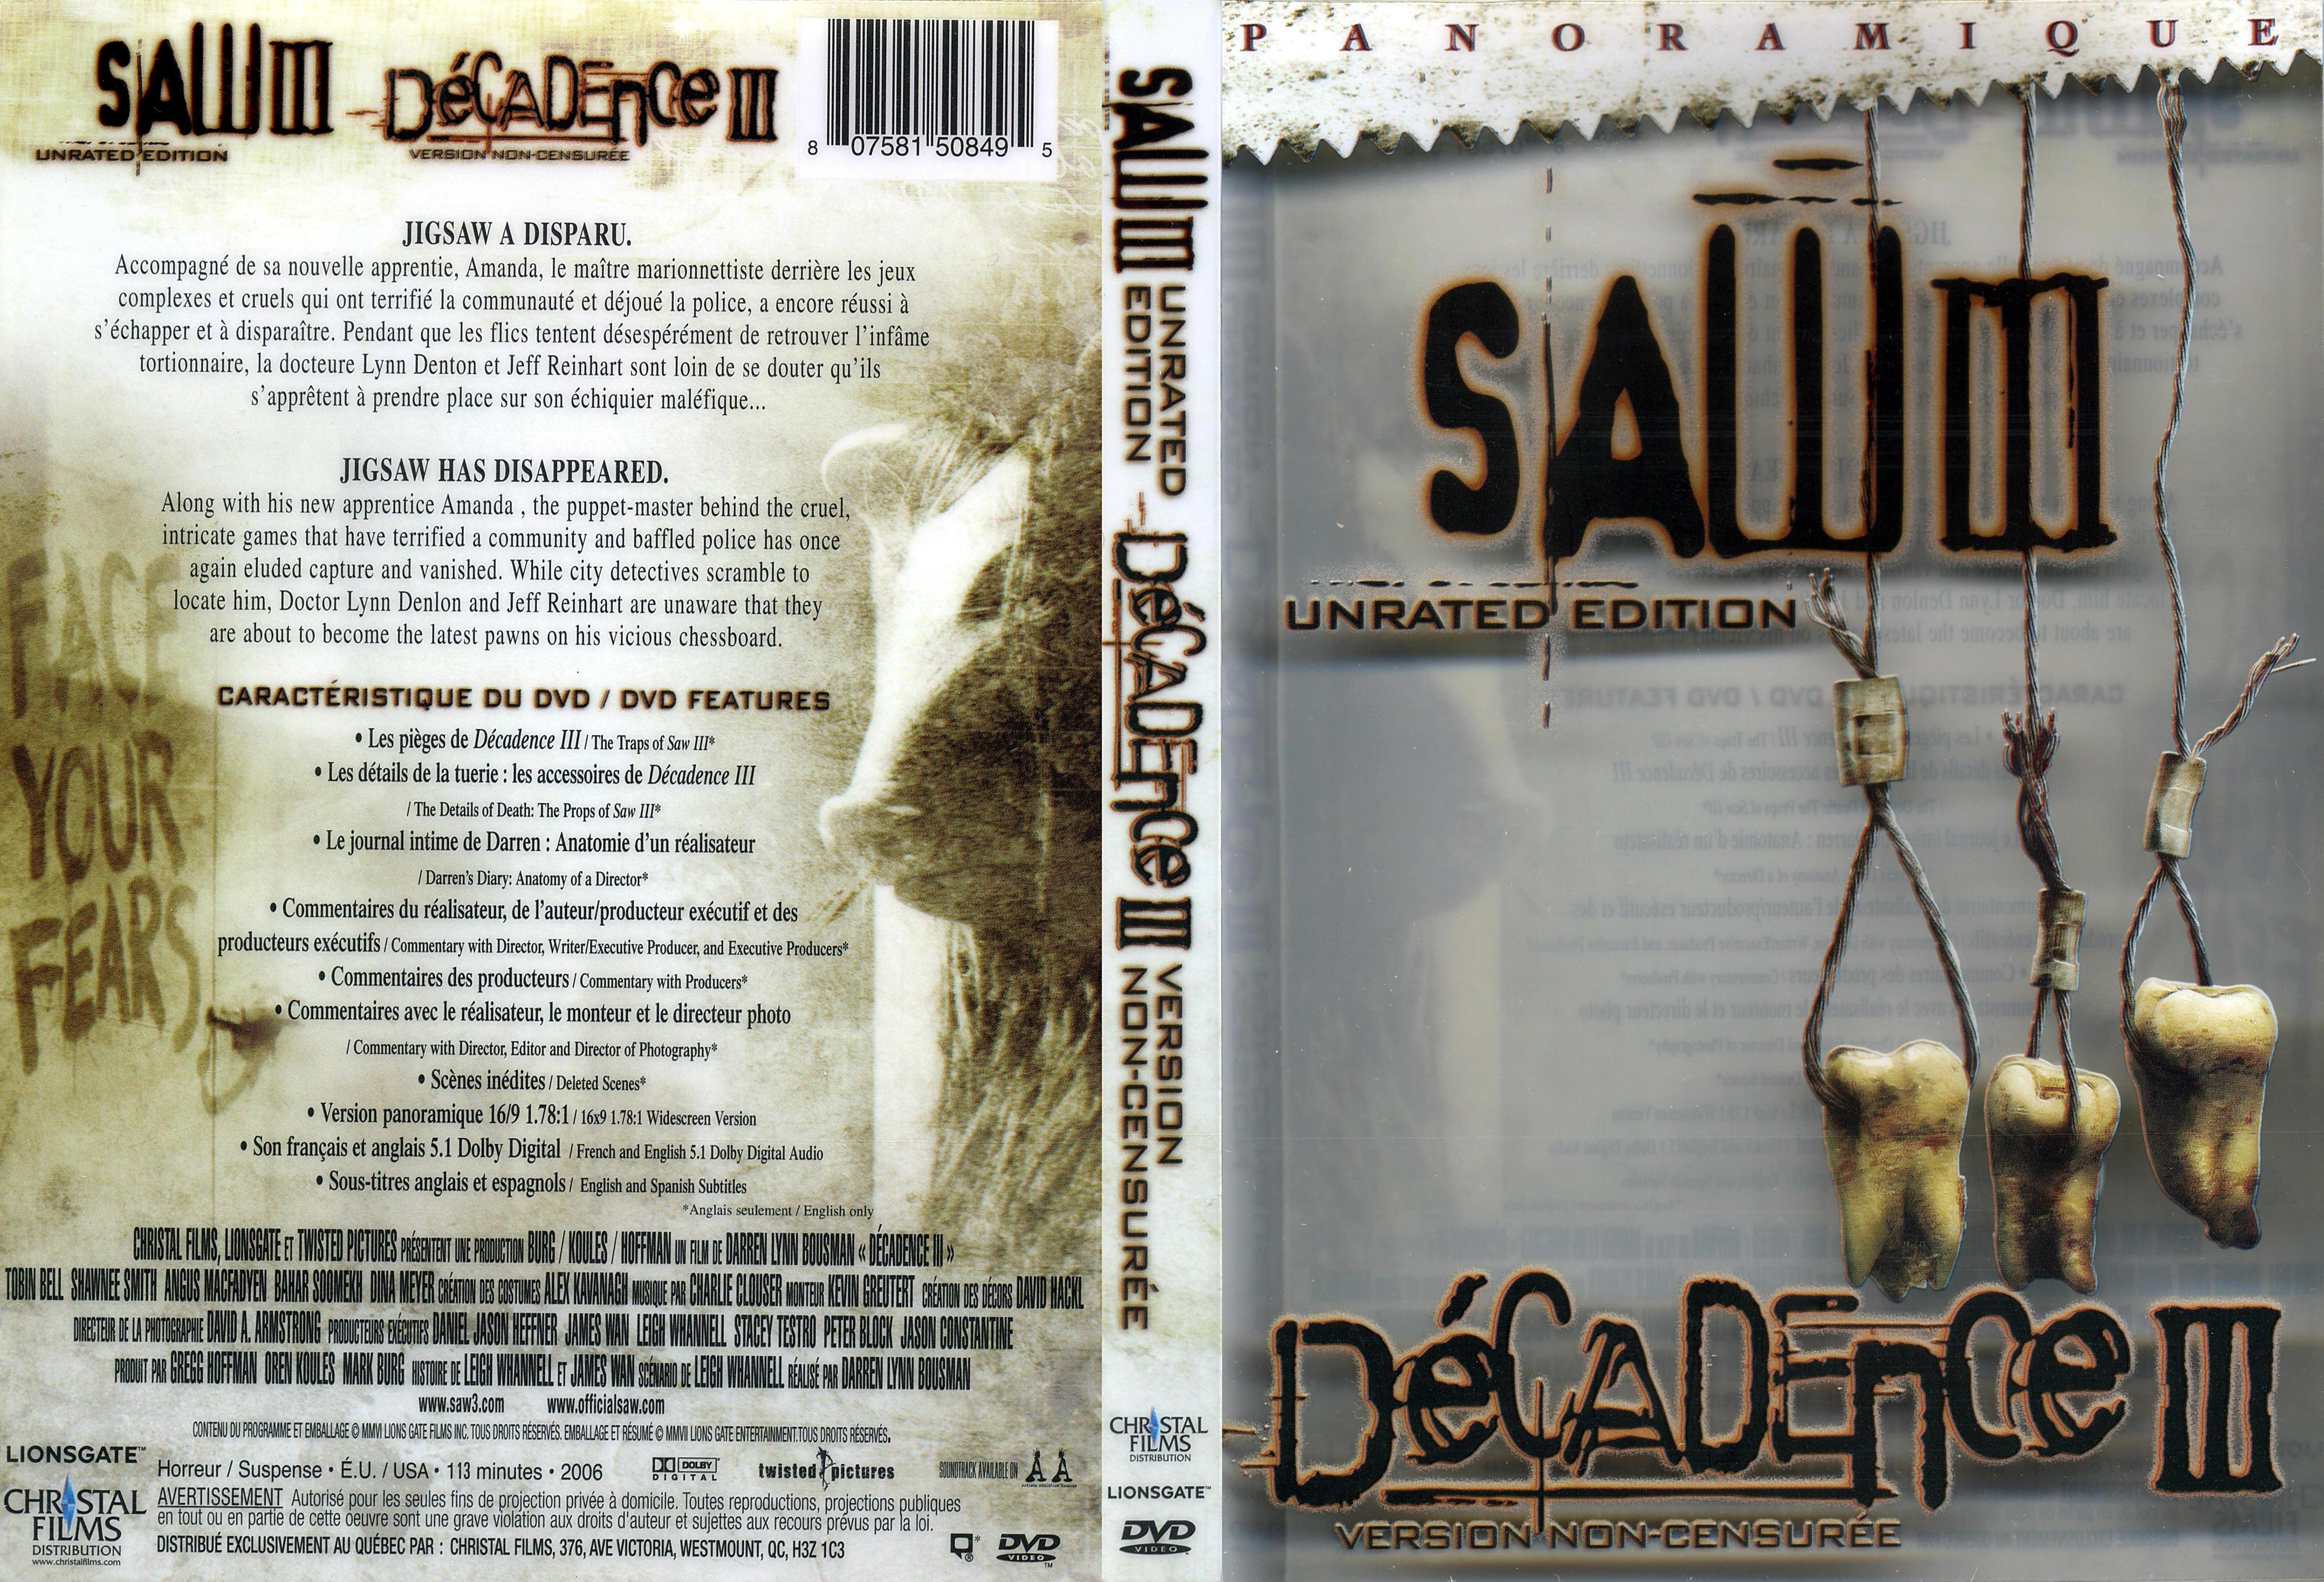 Jaquette DVD Dcadence 3 - Saw 3 (Canadienne)